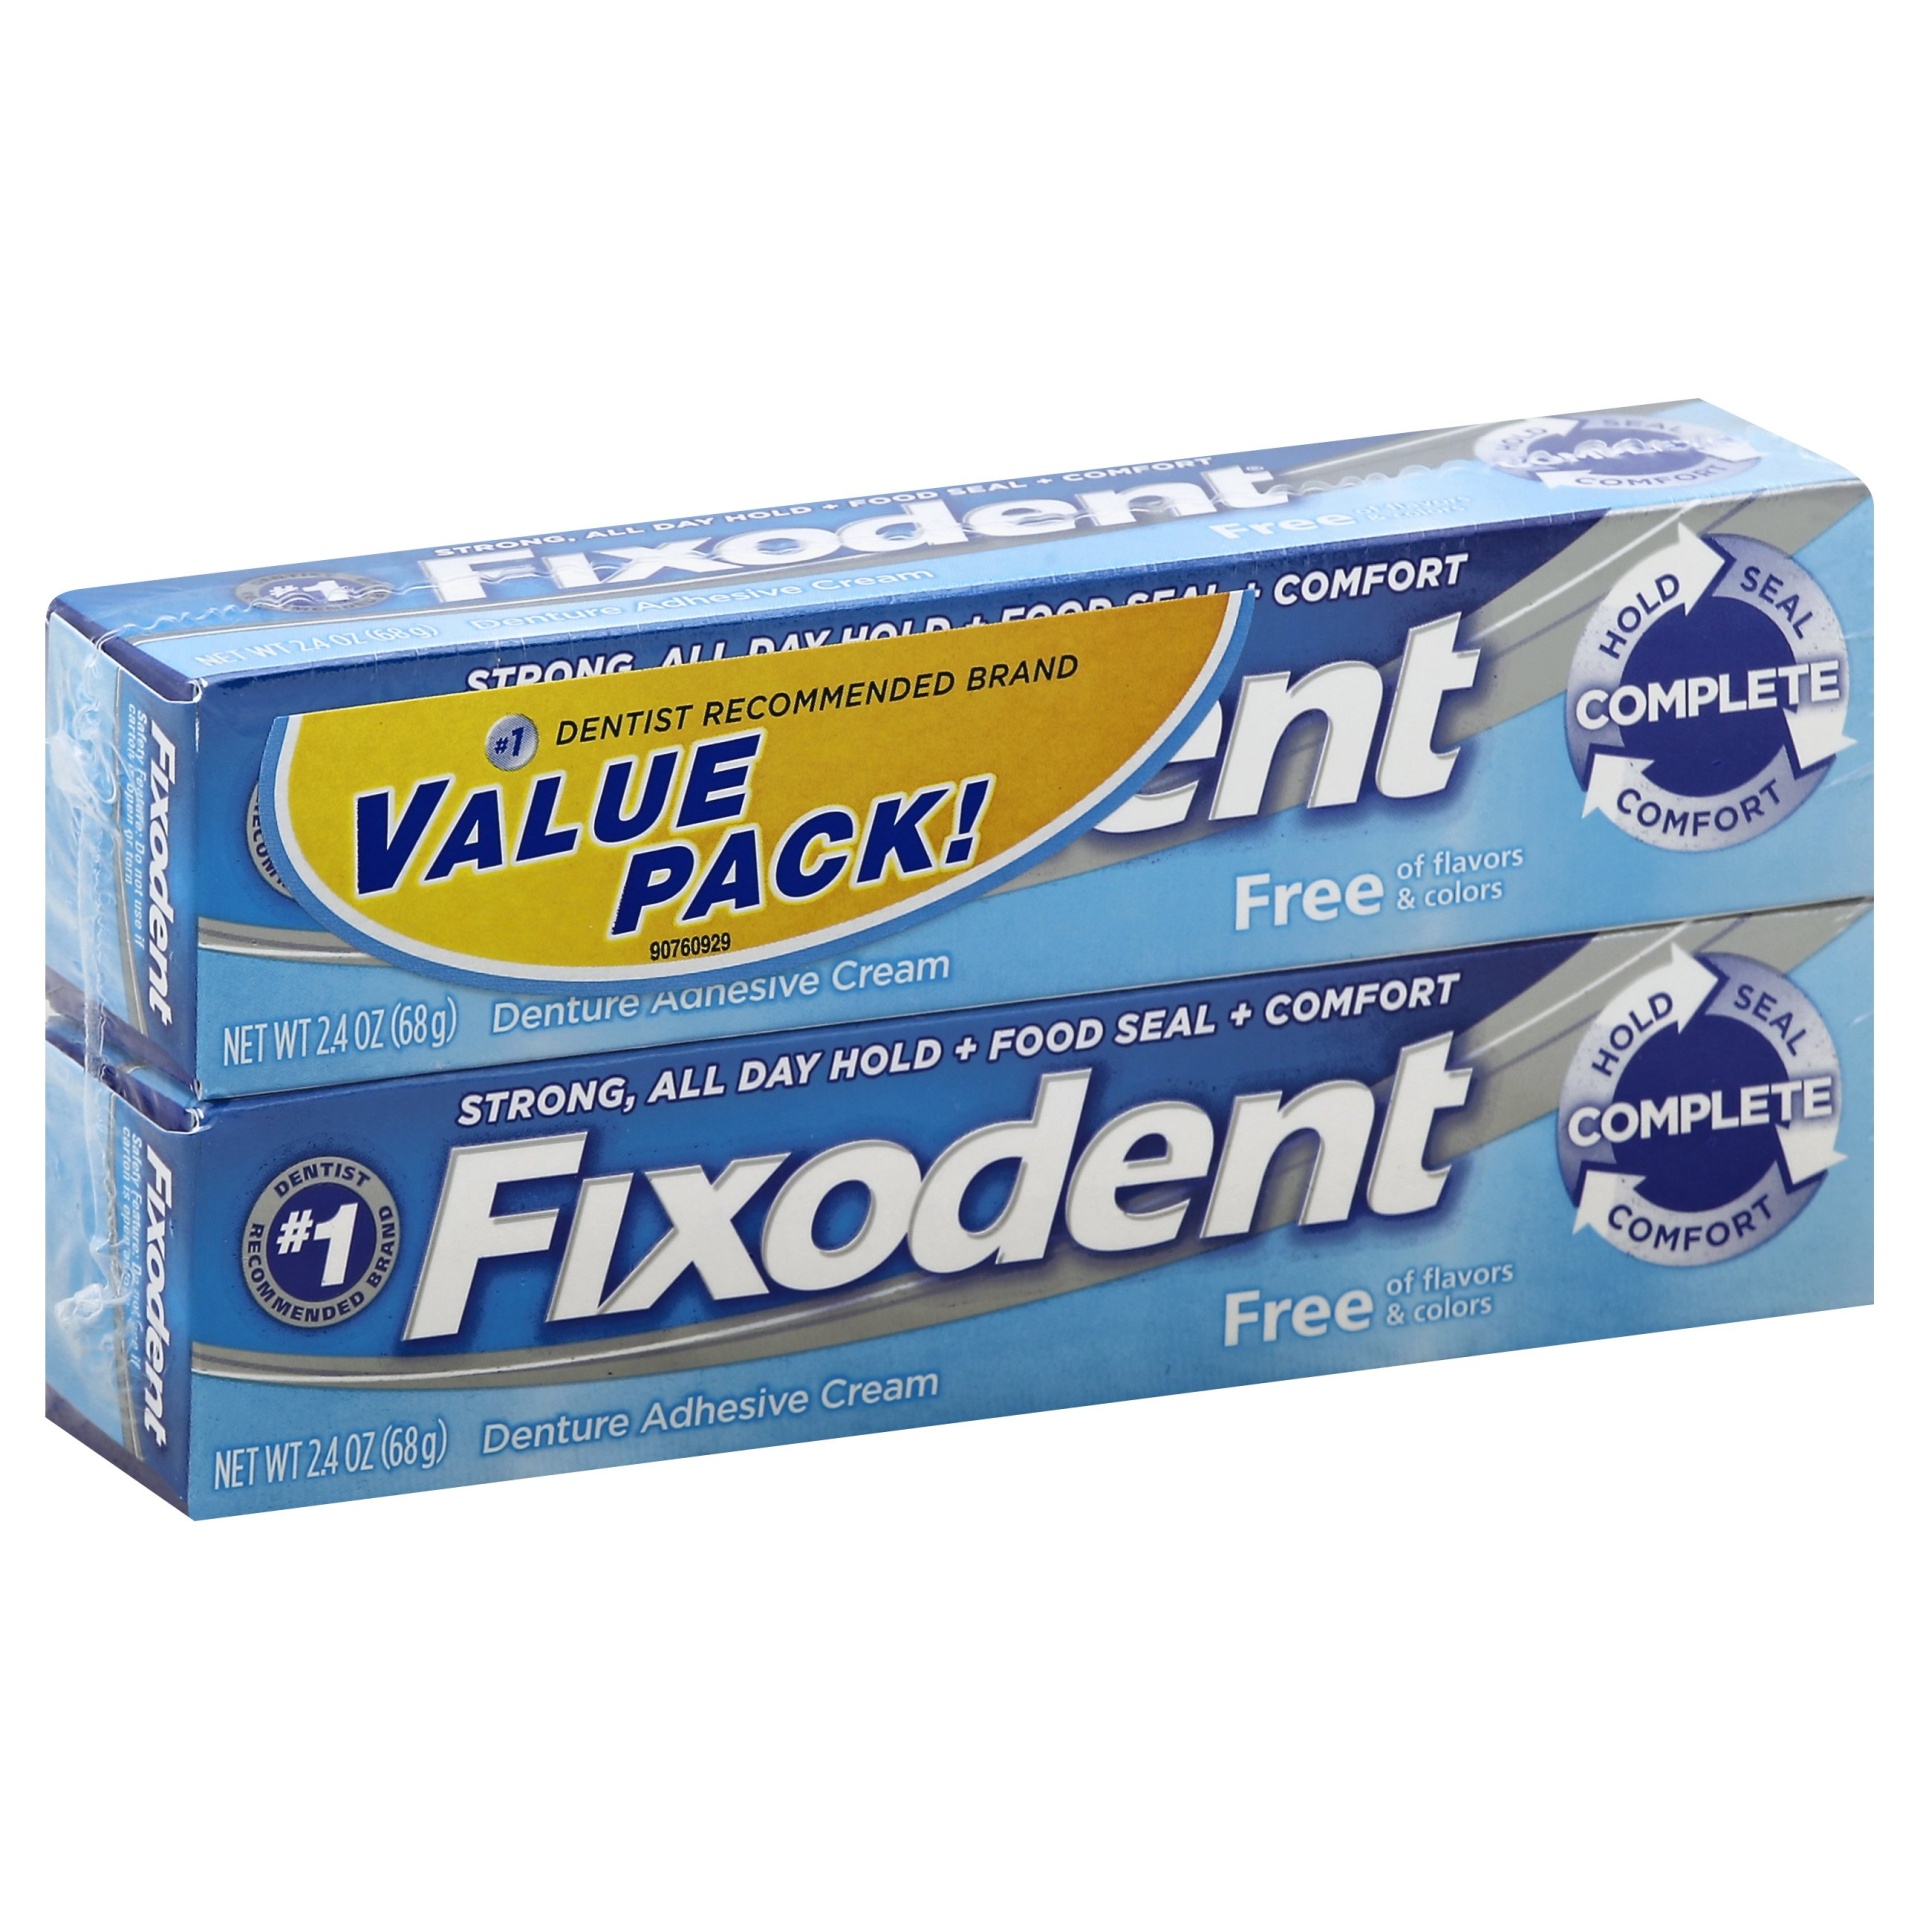 slide 1 of 1, Fixodent Complete Free Denture Adhesive Cream 2-2.4 oz. Boxes, 2 ct